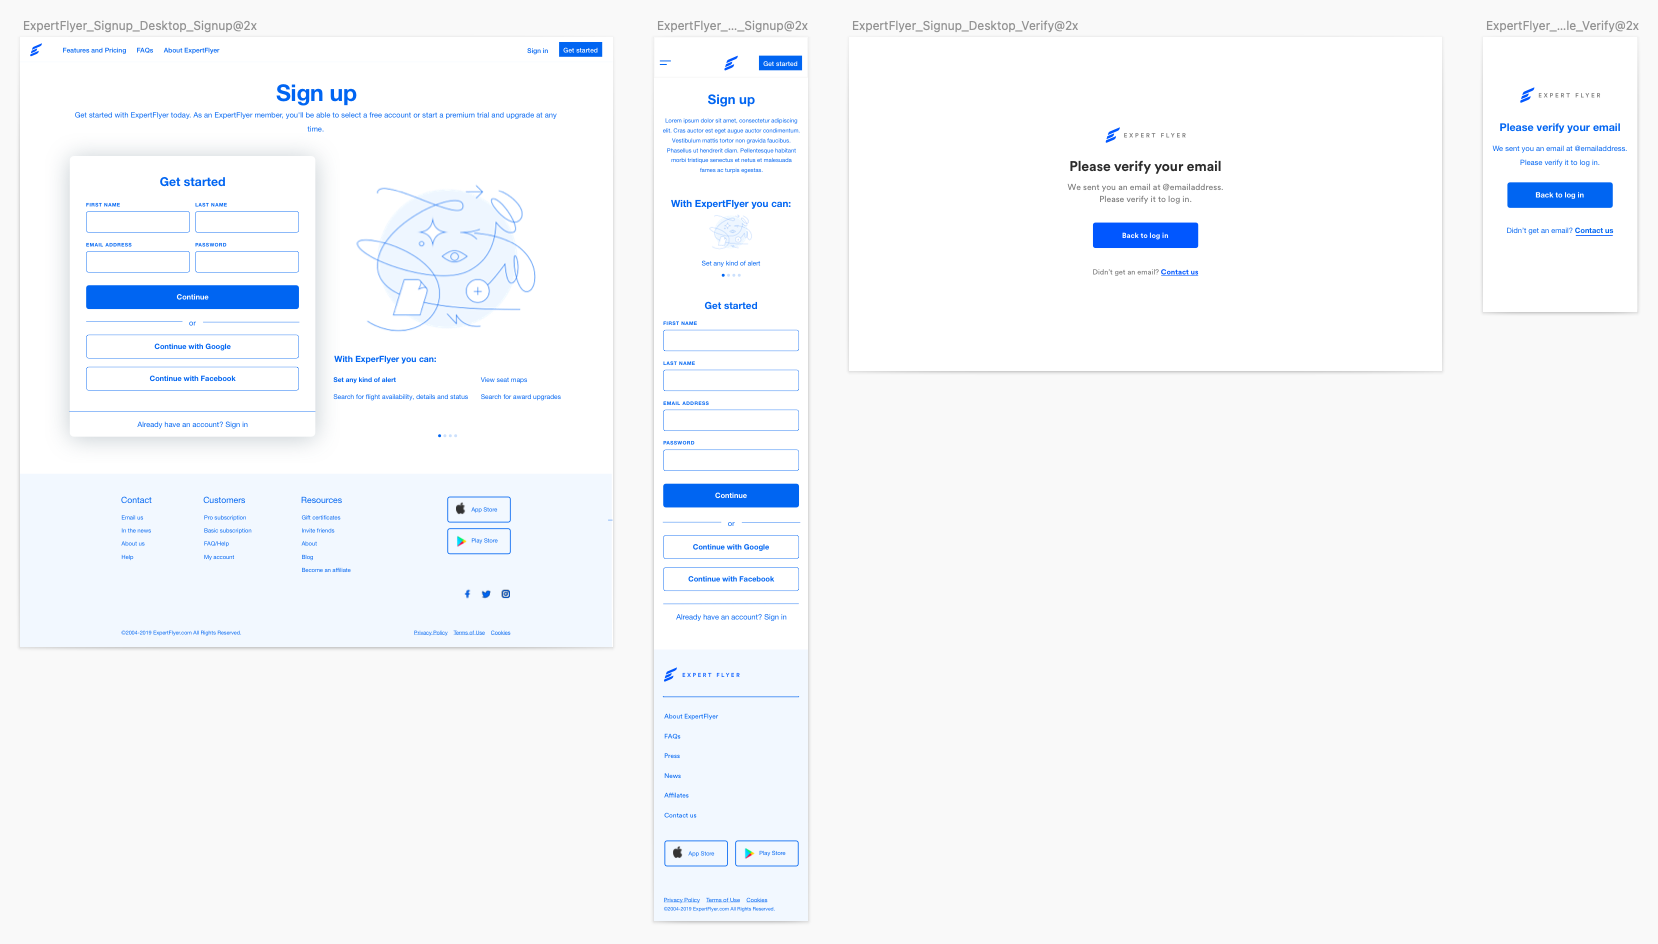 Screenshot of version 1 wireframes of the signup flow based on the sketch - sign up and verification